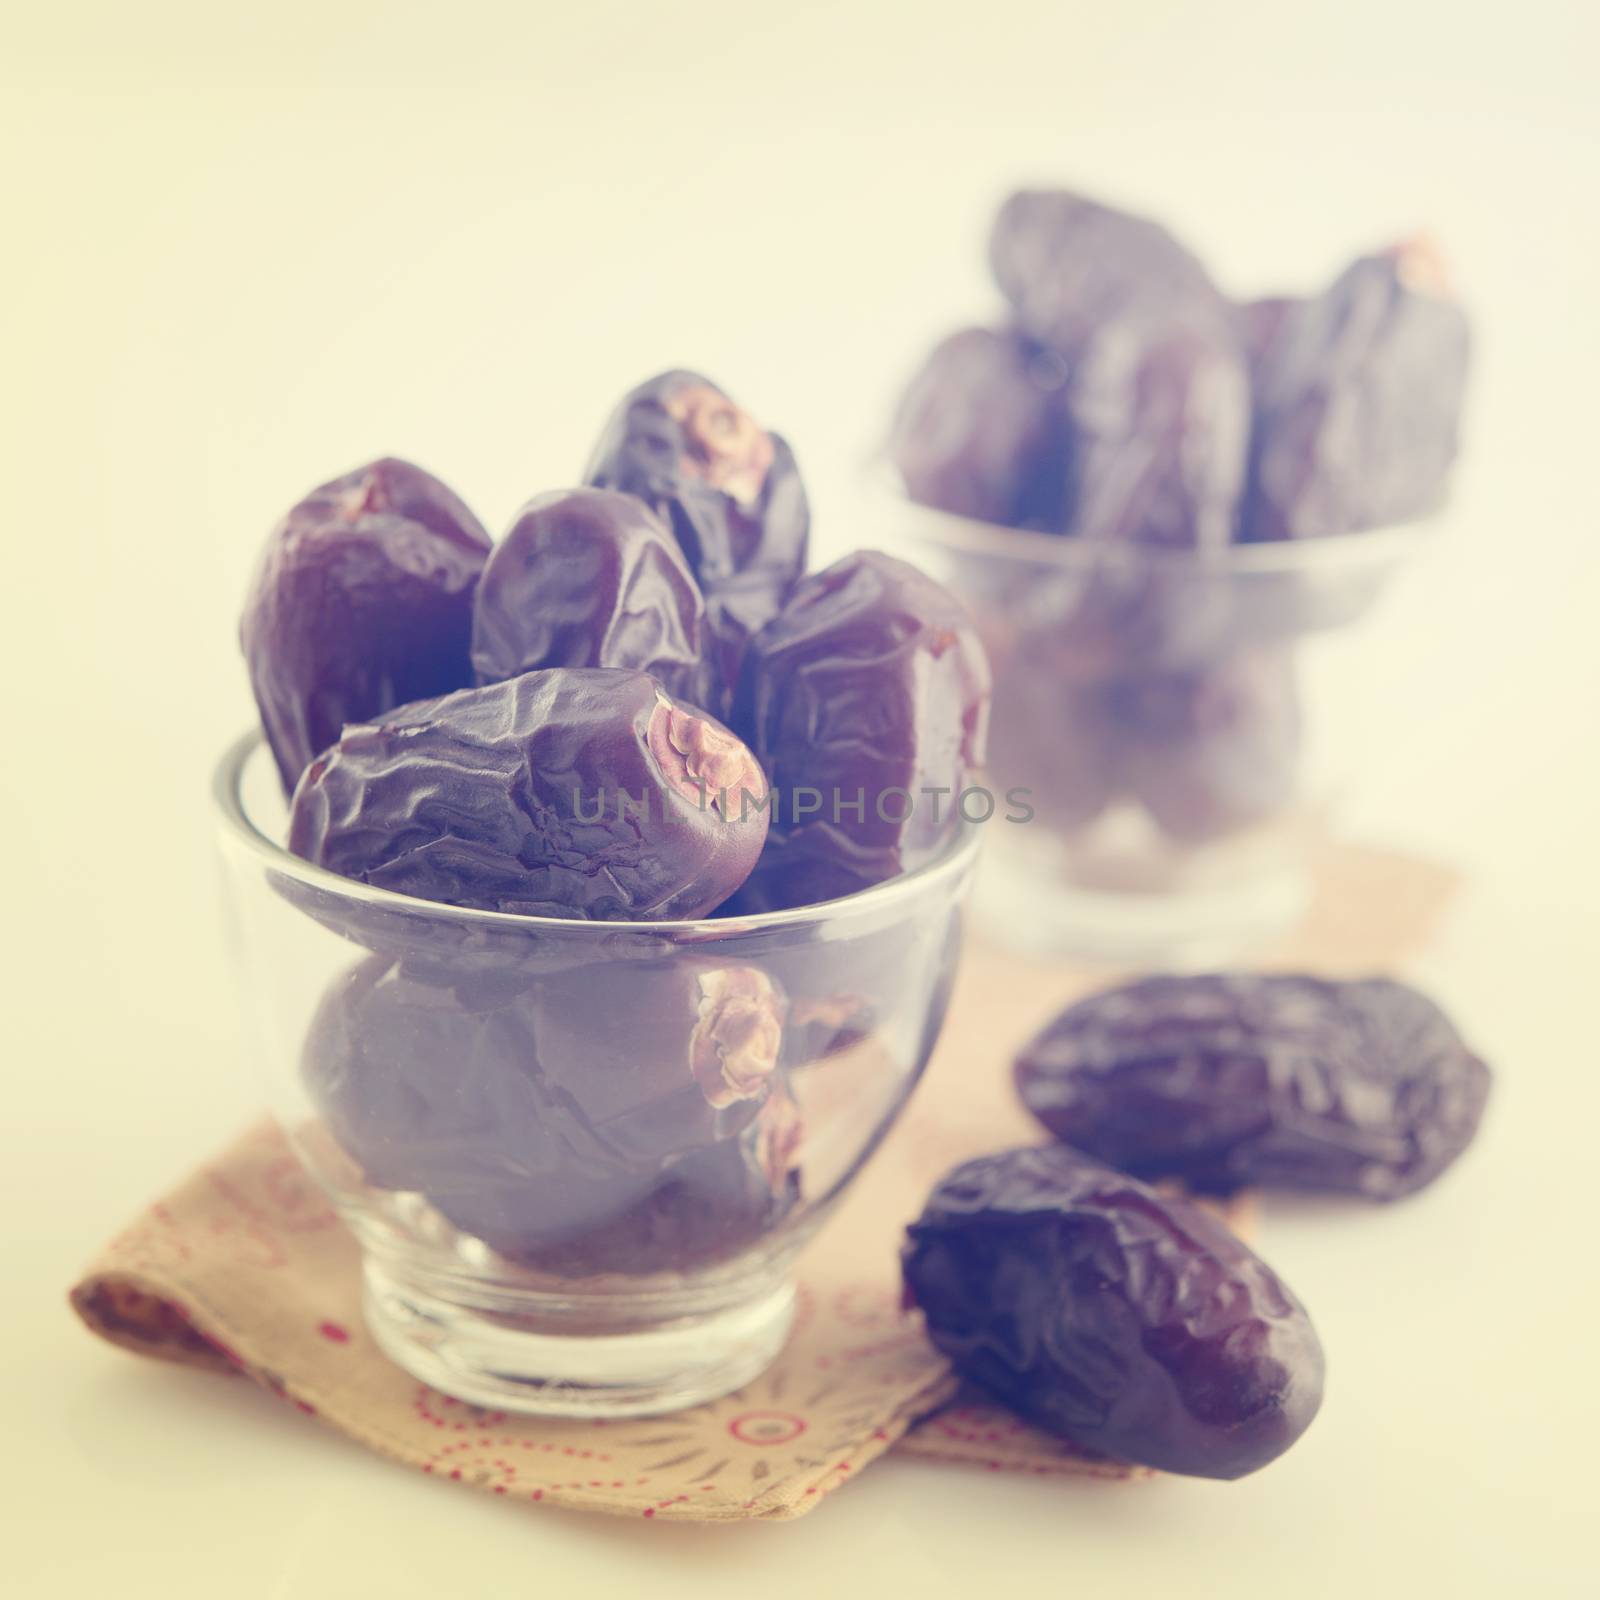 Dried date palm fruits or kurma, ramadan food which eaten in fasting month in vintage retro effect.